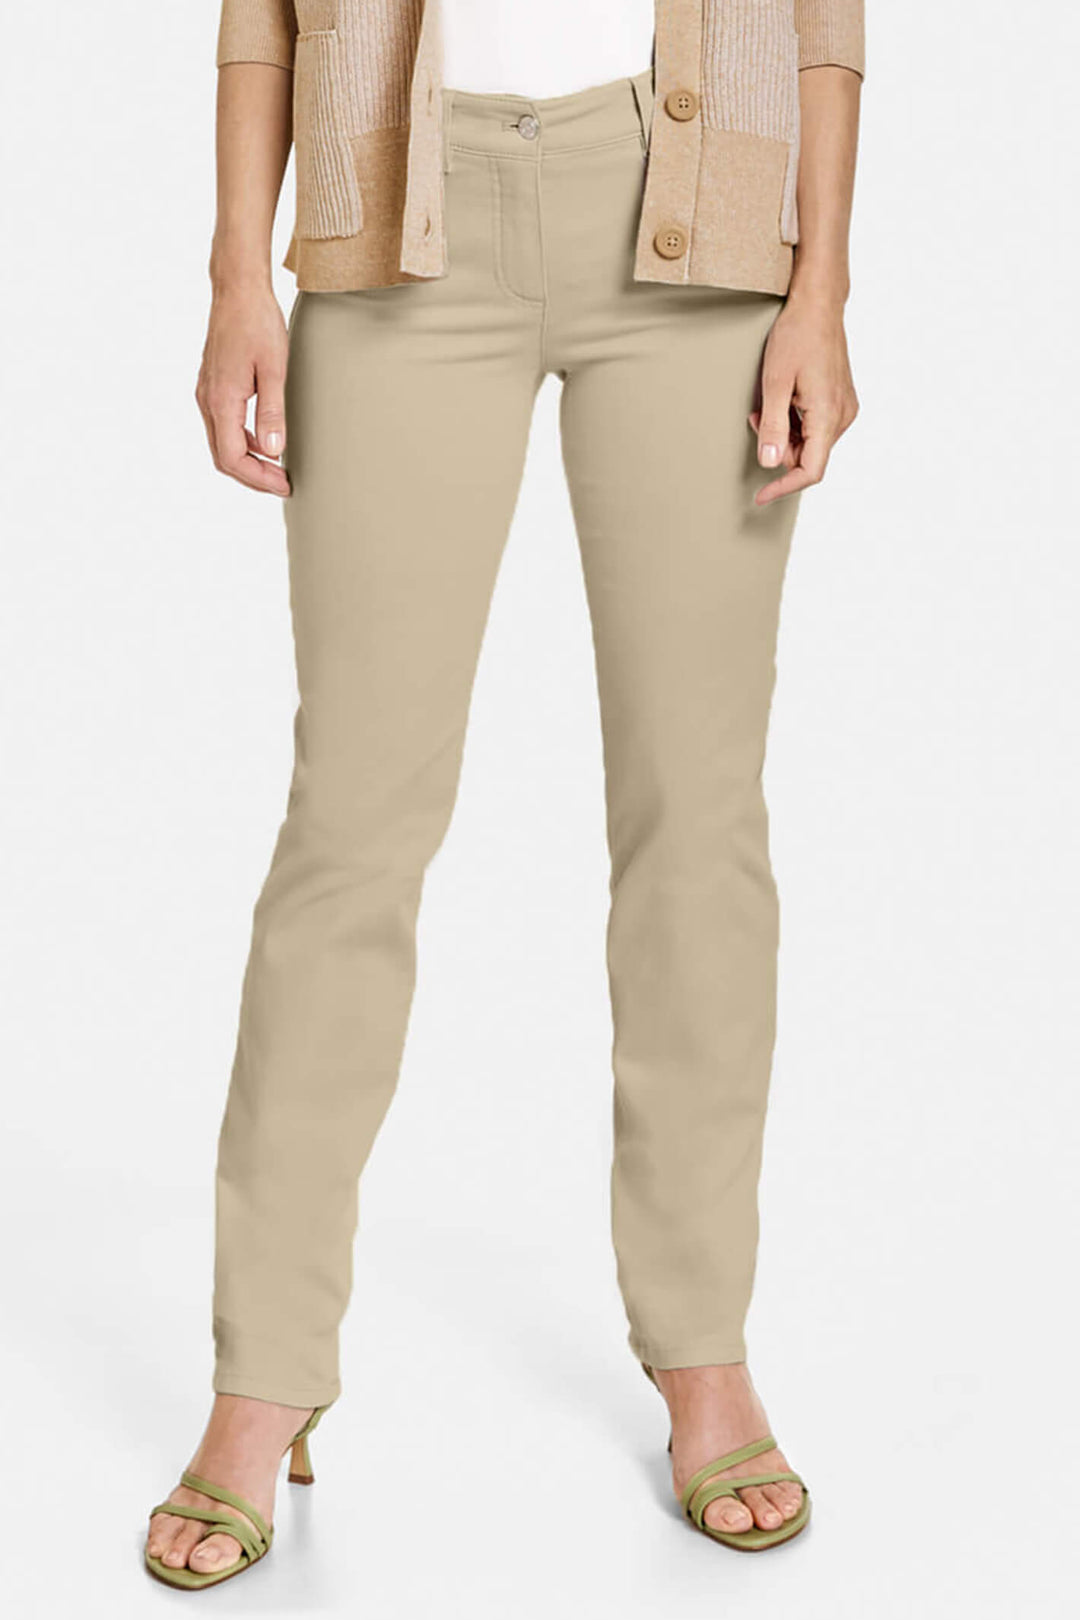 Gerry Weber 92151 Sand Best4me Slim Fit Jeans - Expeirence Boutique